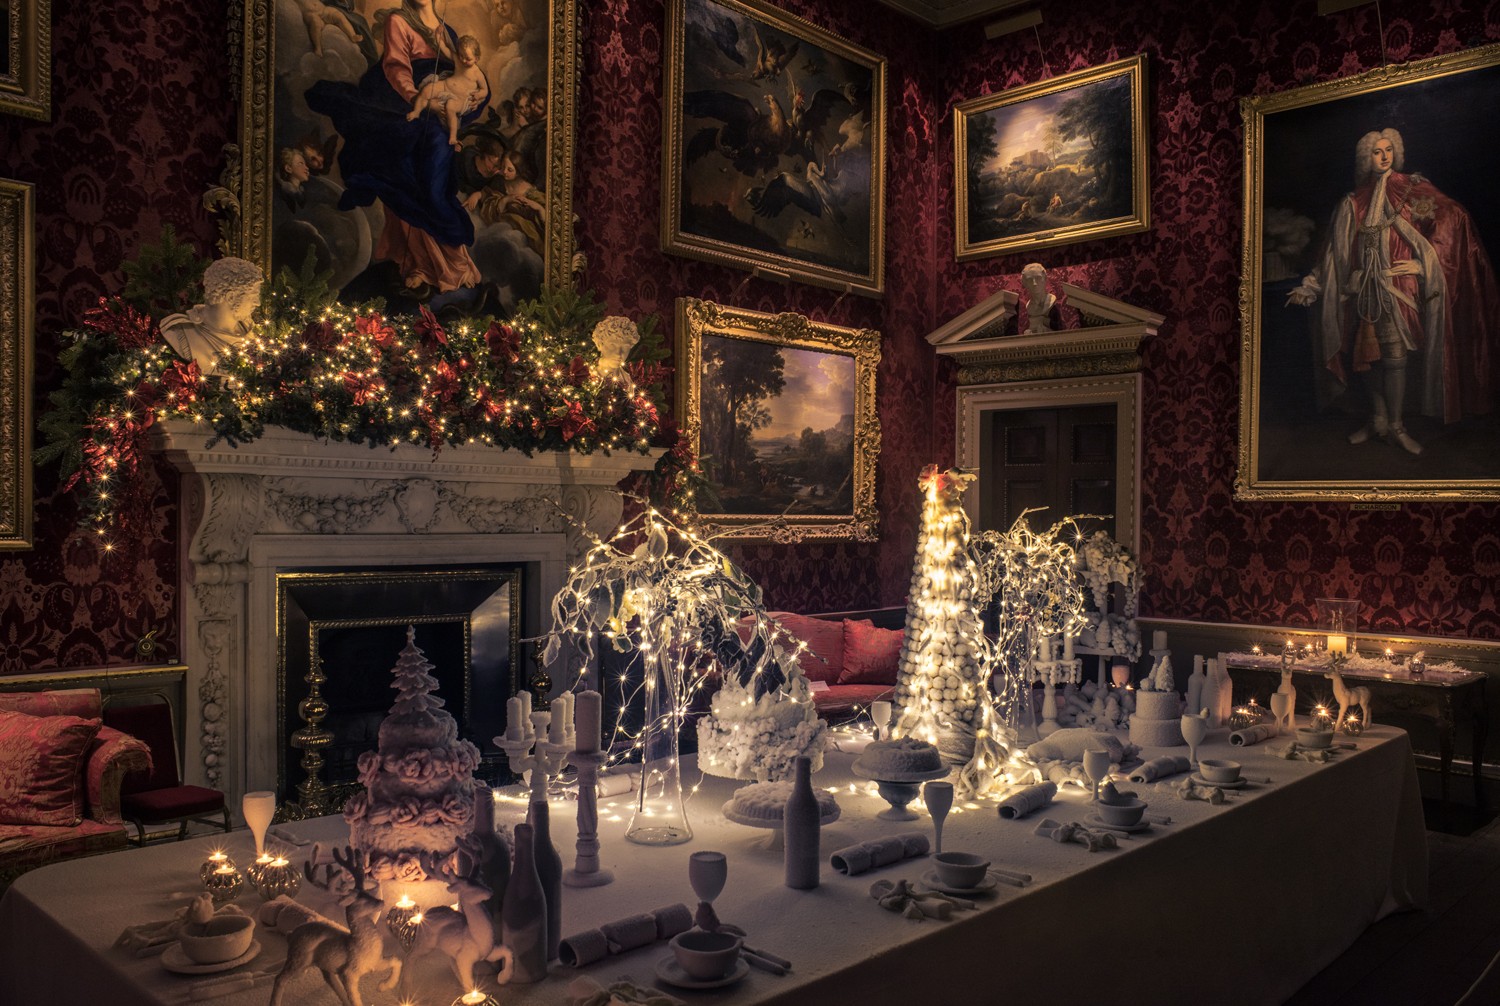 Holkham Hall Winter Set Dress by FX Live, Artificial Ice, Fake Snow, Christmas Party Set Up Private Event